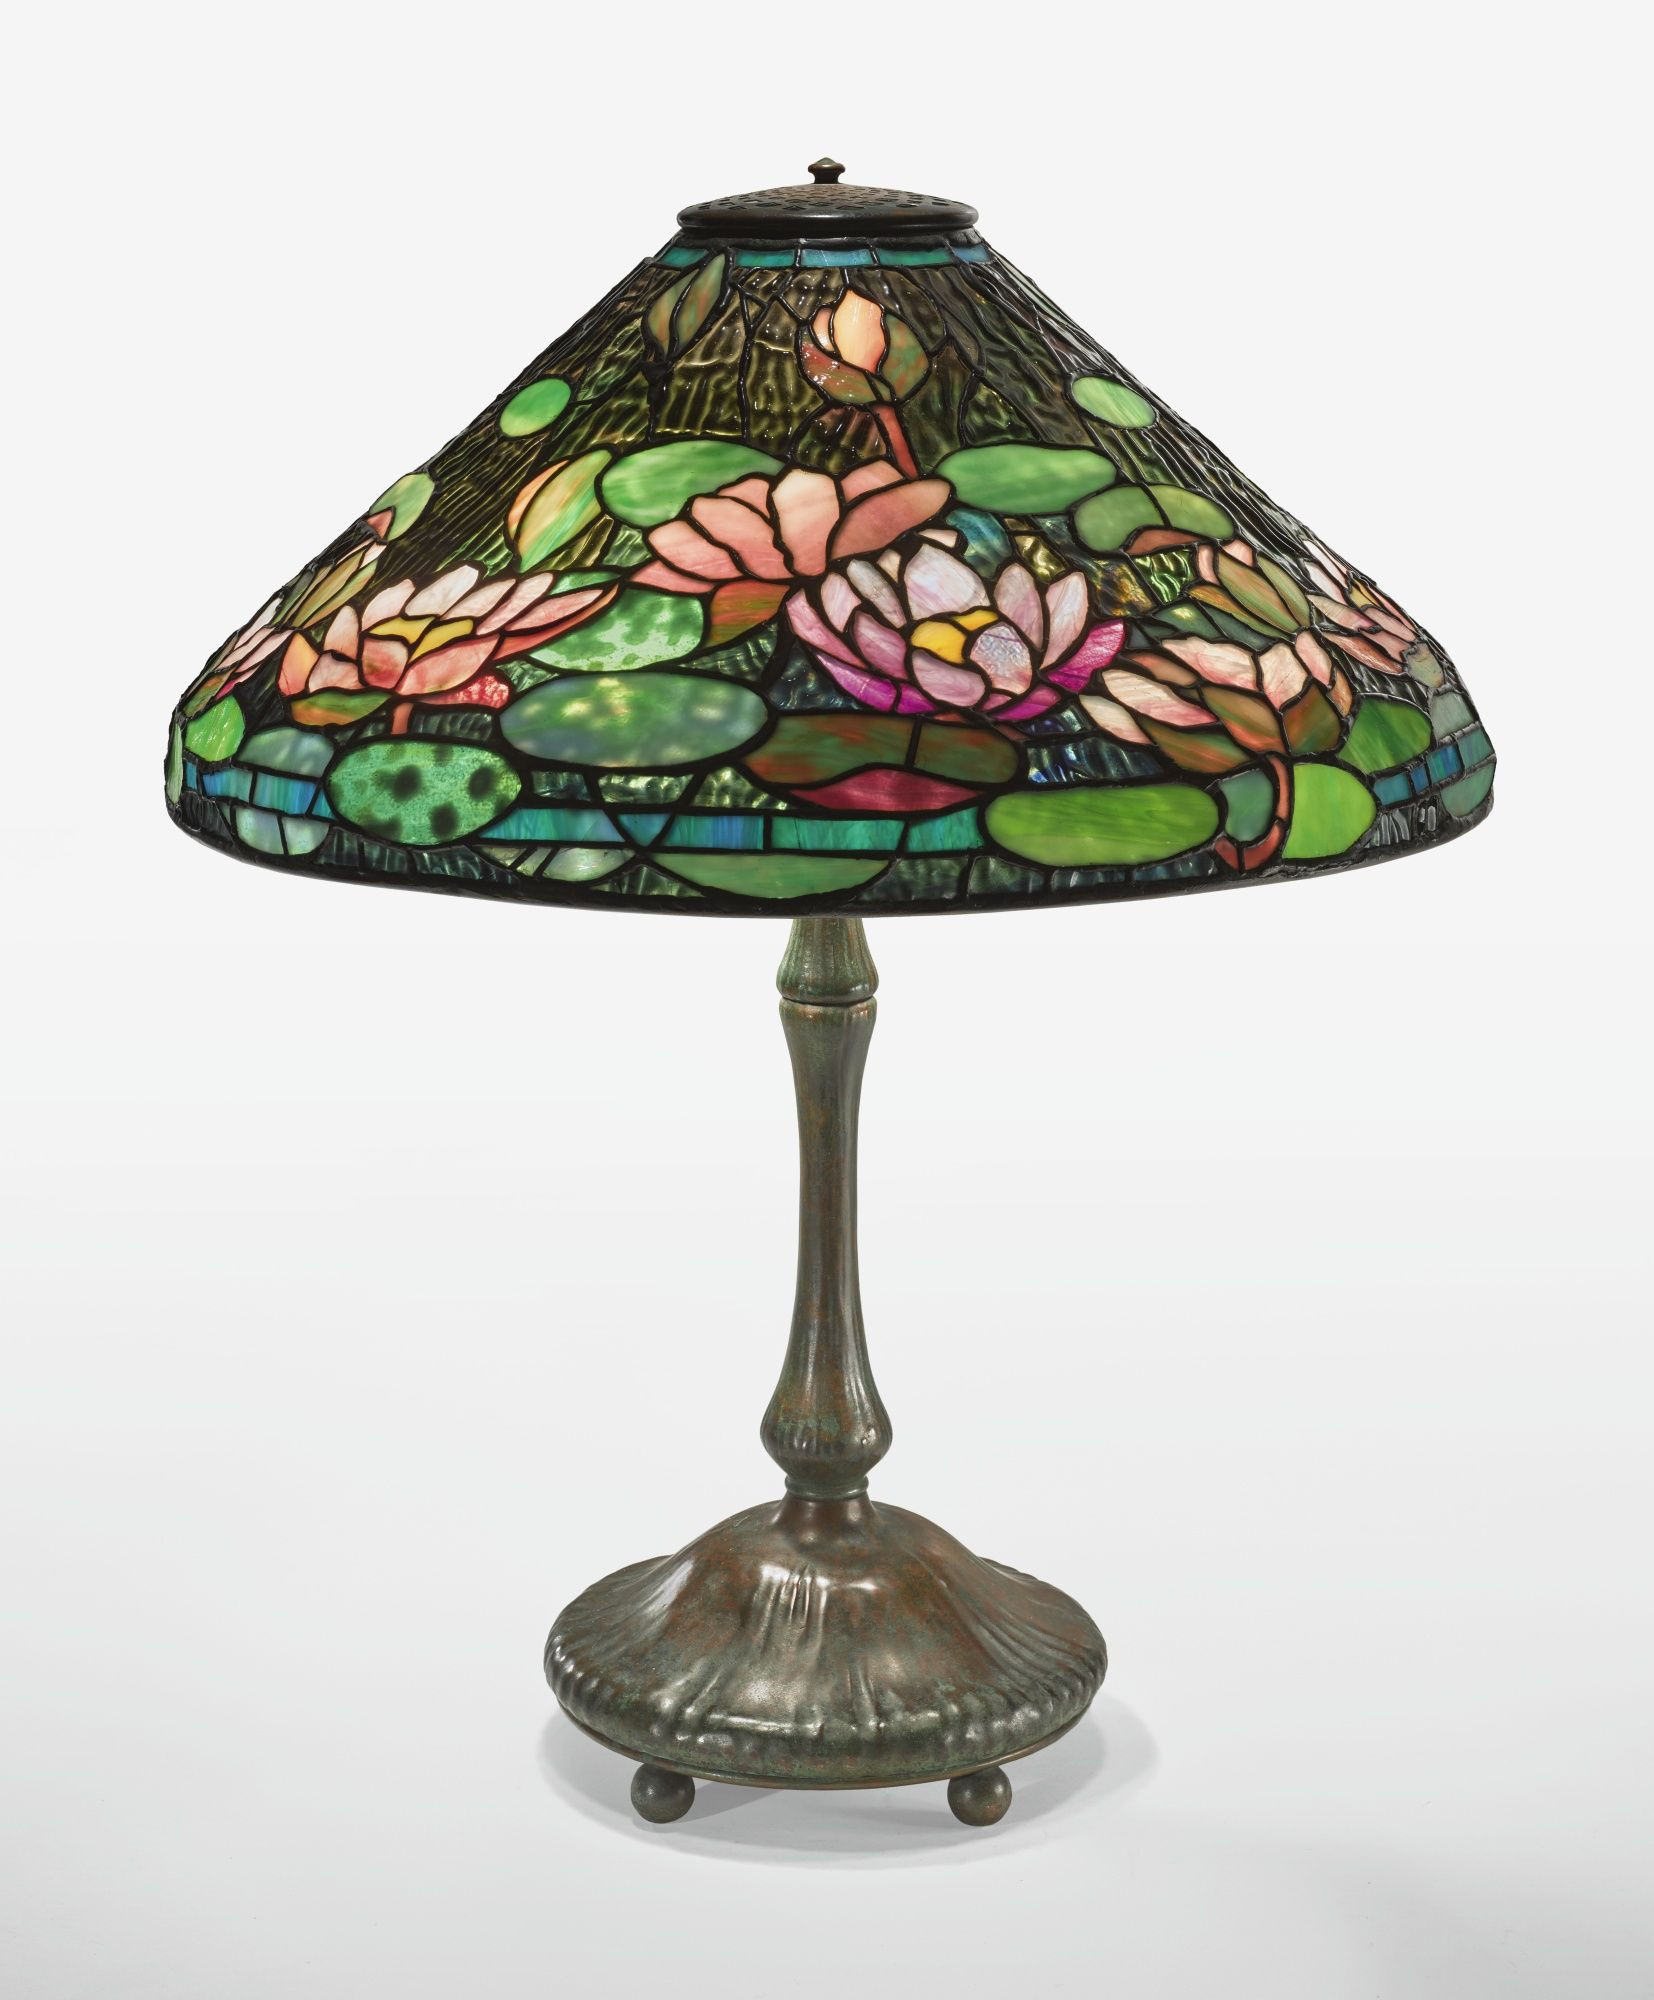 14 attractive Tiffany Tulip Vase Price 2024 free download tiffany tulip vase price of tiffany studios pond lily table lamp shade impressed tiffany inside tiffany studios pond lily table lamp shade impressed tiffany studios new york 1490